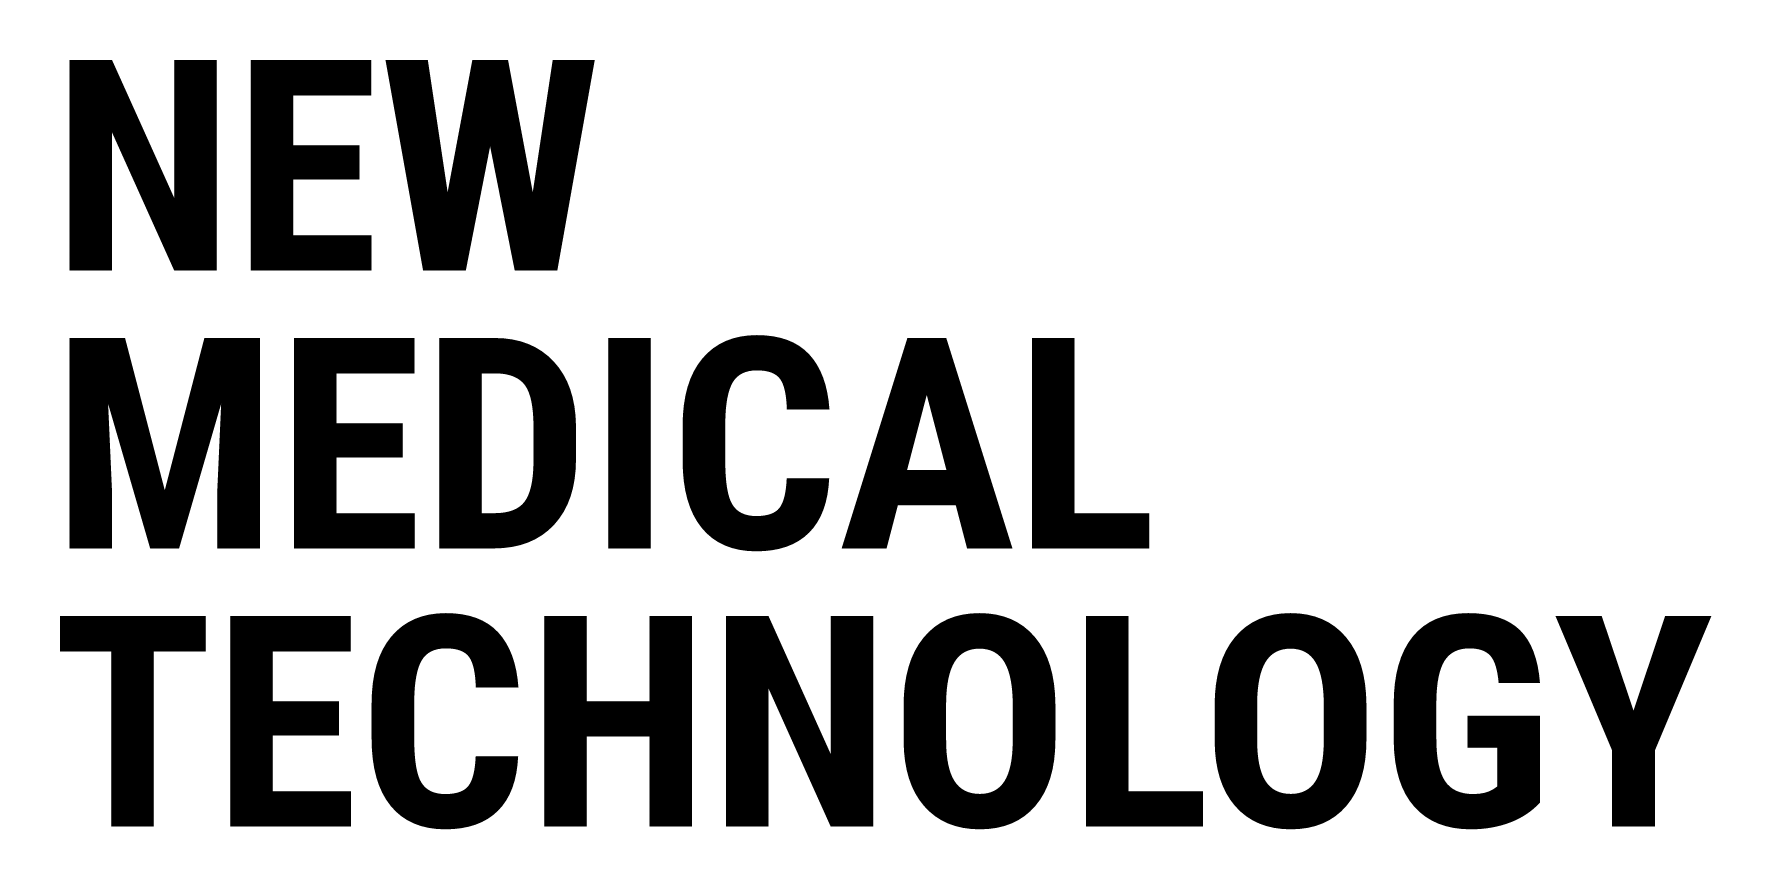 New Medical Technology